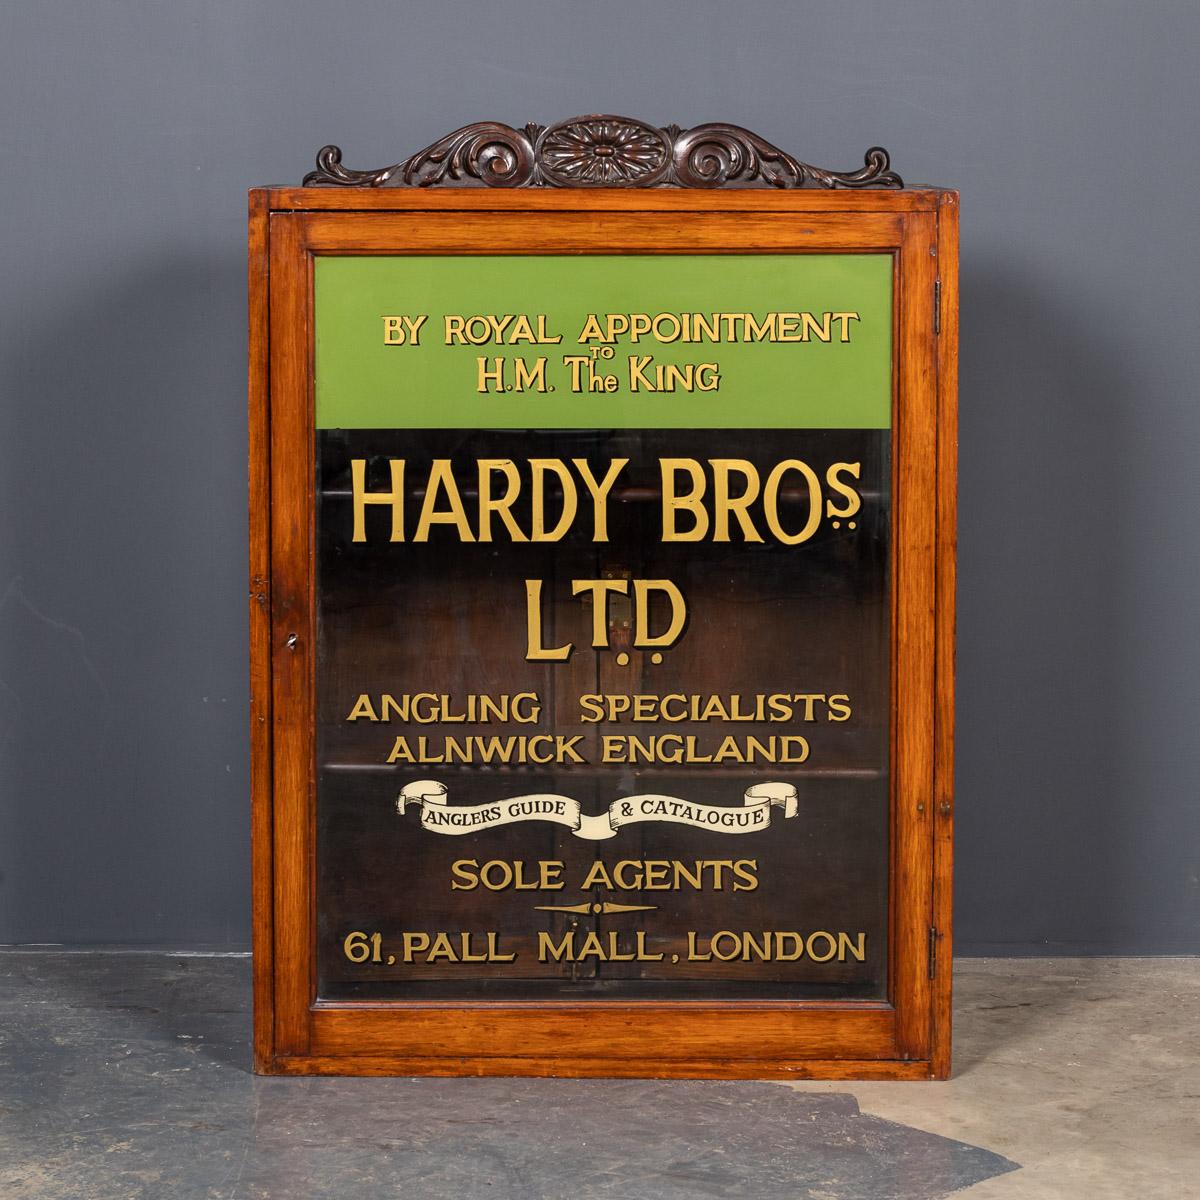 Antique early-20th century English glass & mahogany shop display cabinet with brass edges on a wooden stand. A small counter top display cabinet is later sign written for the famous Hardy Brothers angling specialists with rear access and two glass